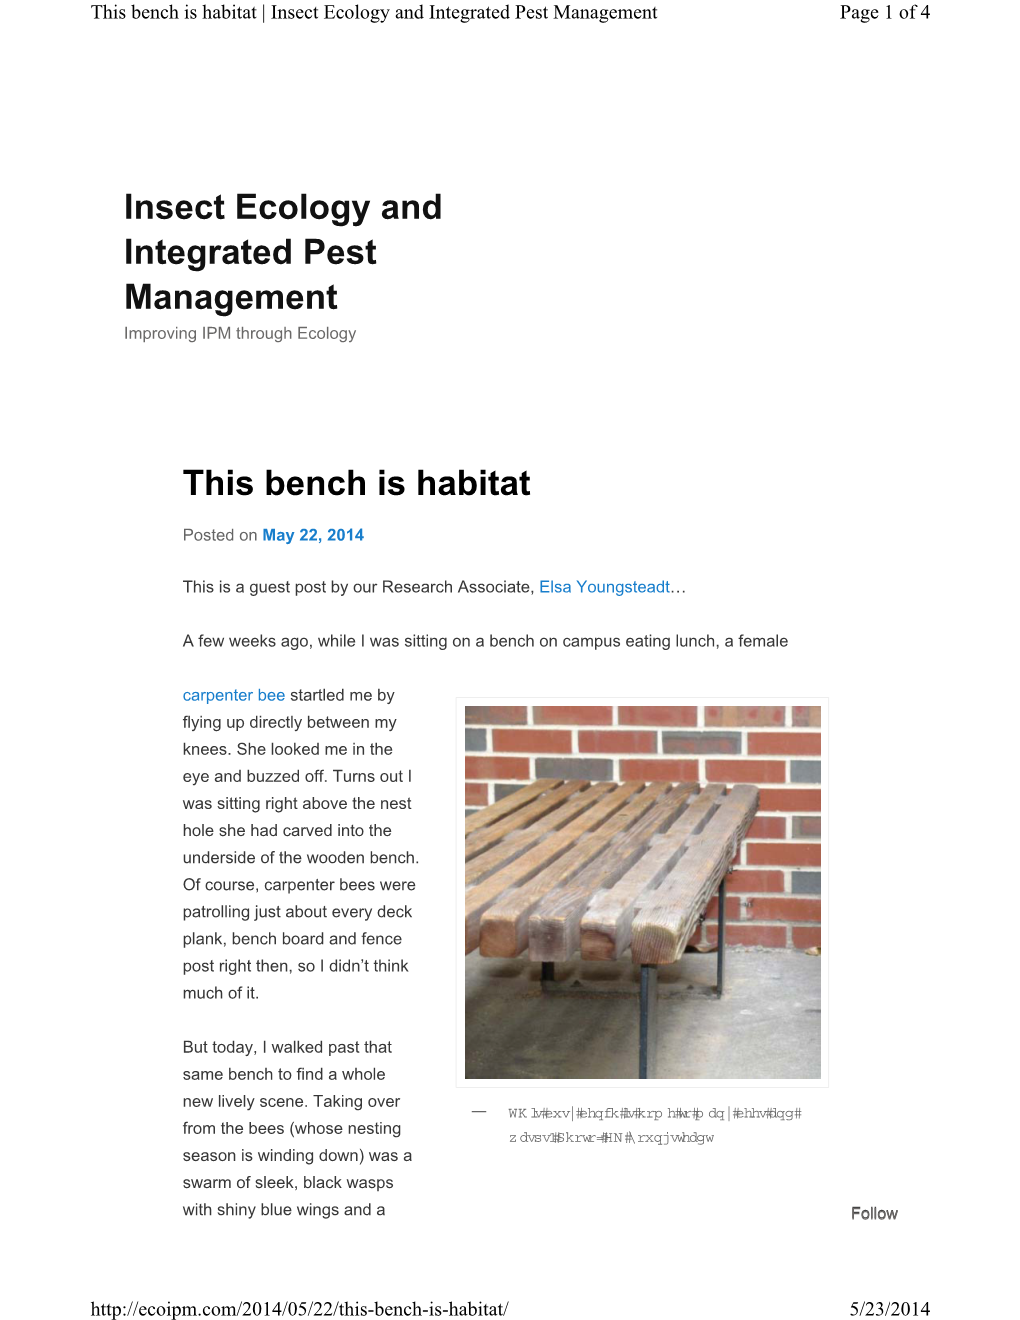 This Bench Is Habitat Insect Ecology and Integrated Pest Management